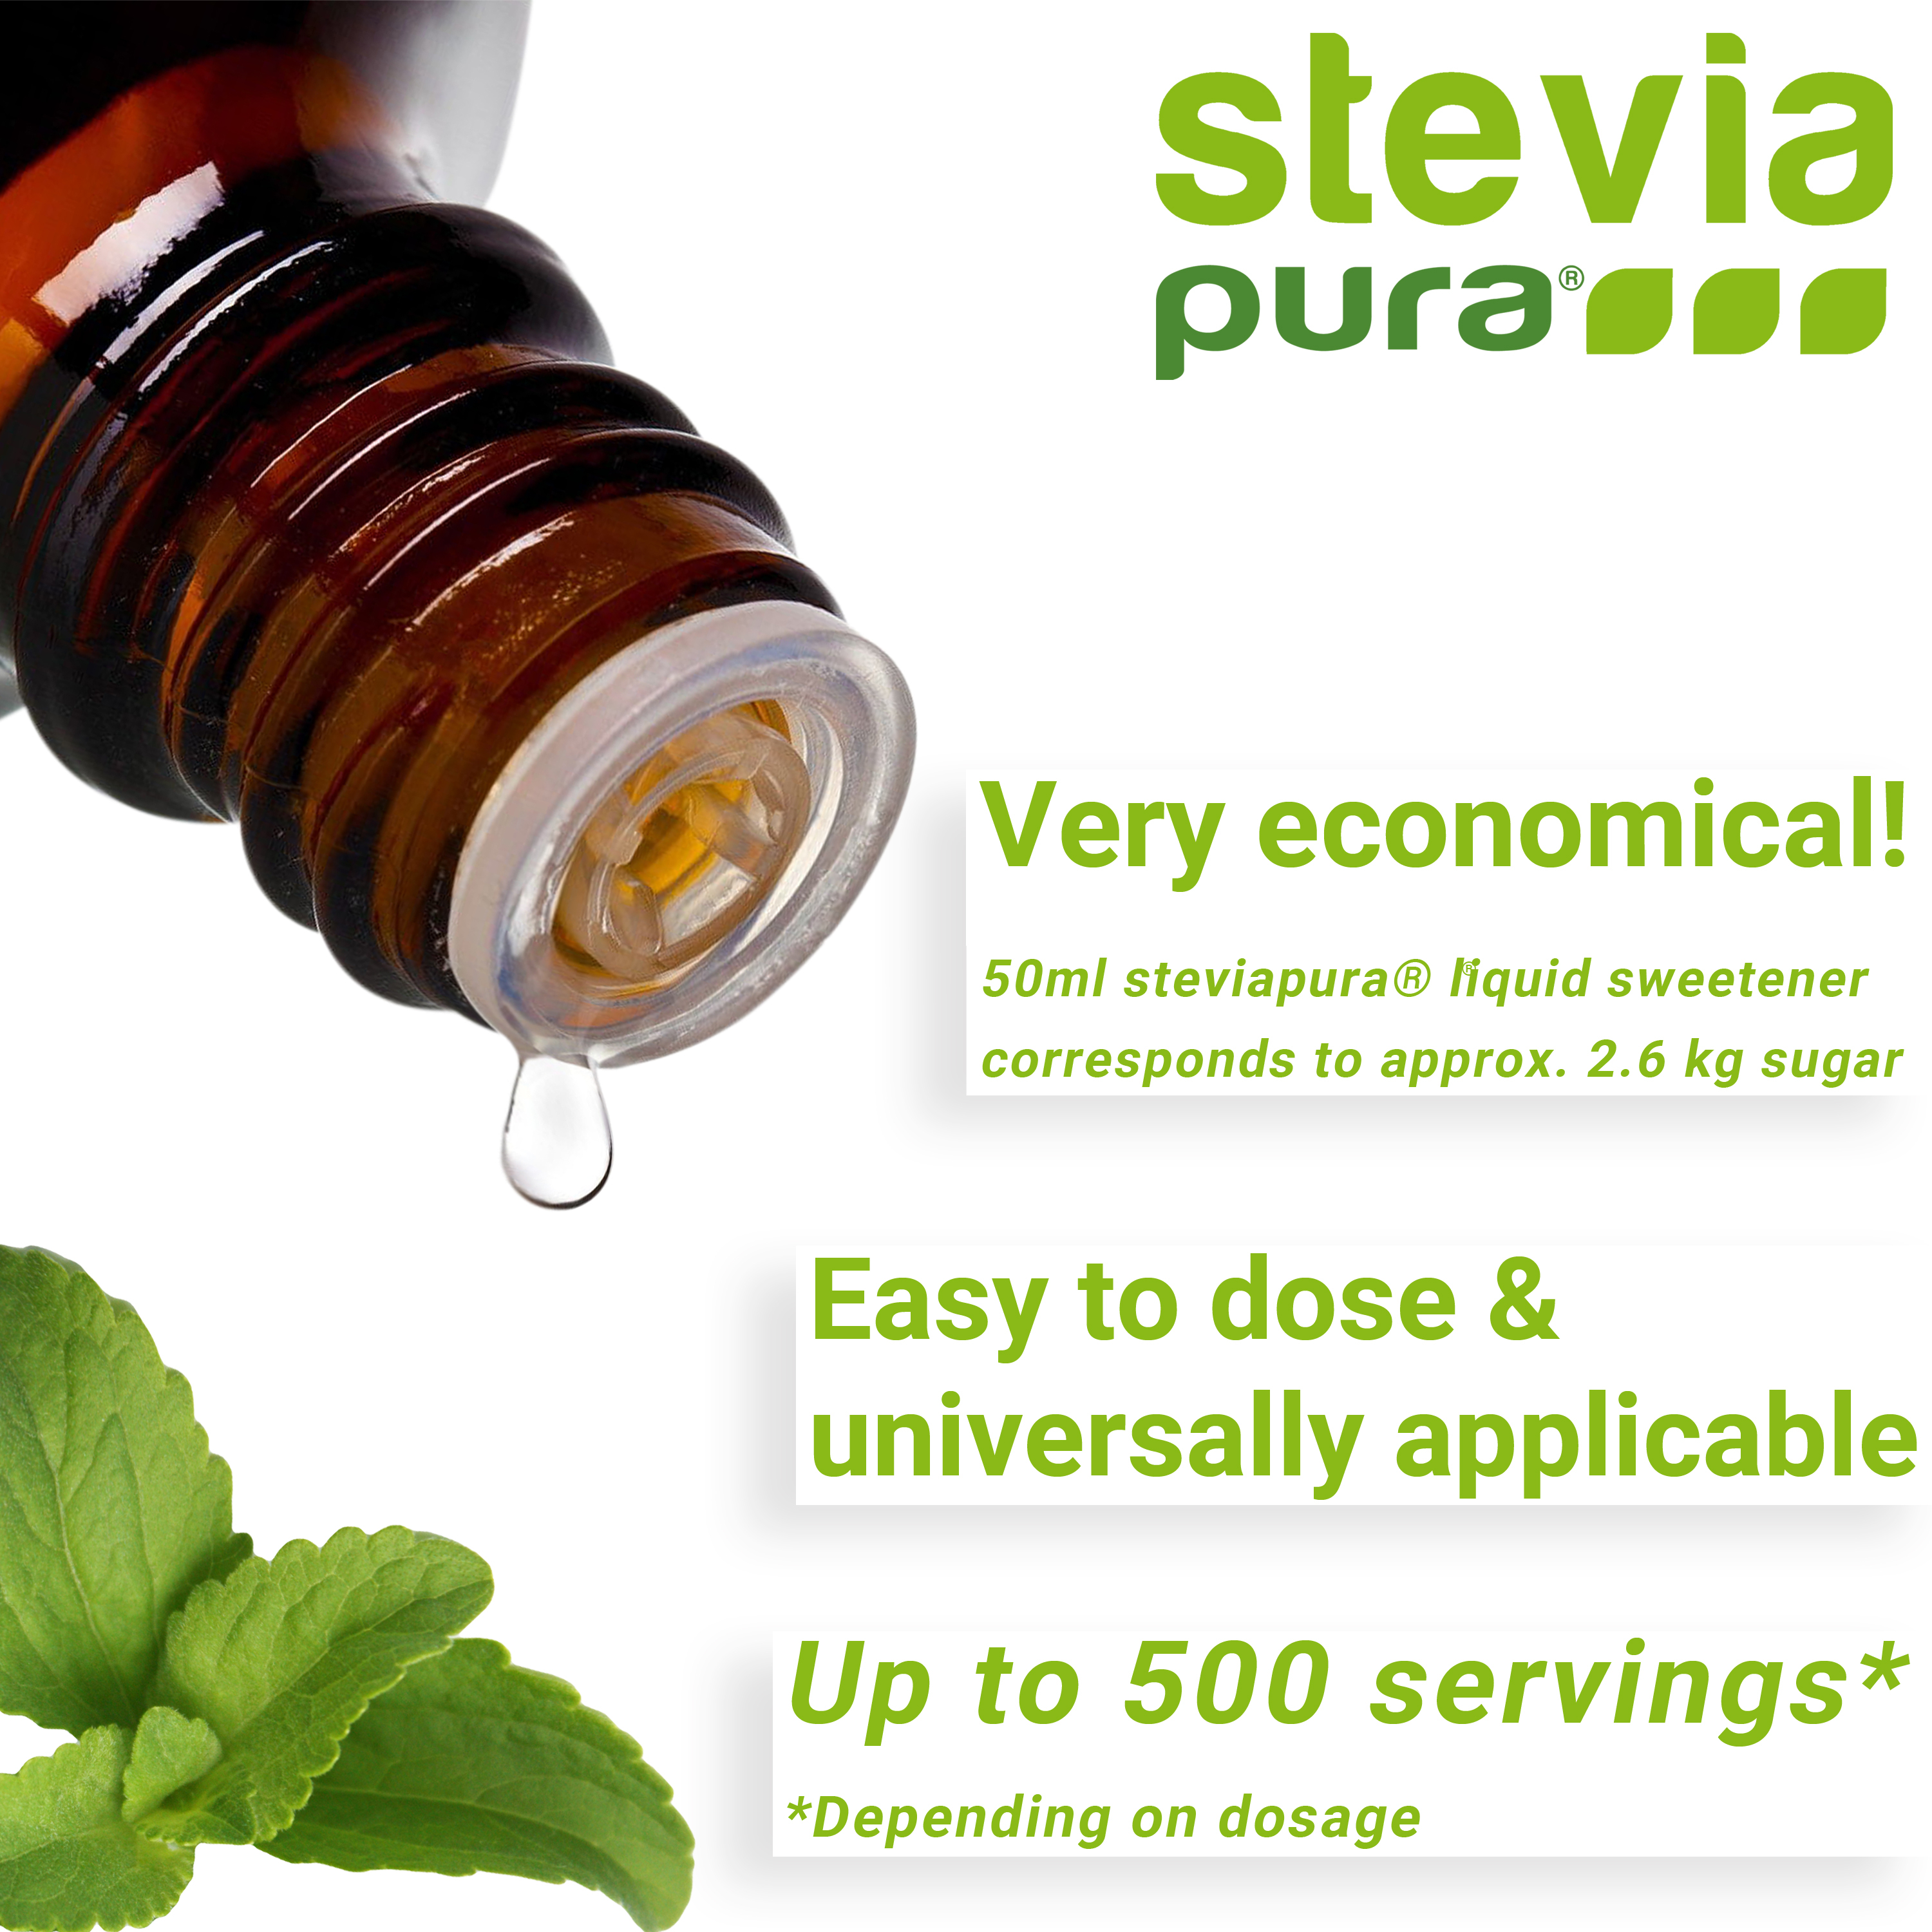 Stevia Liquid is easy to dose and can be used universally.